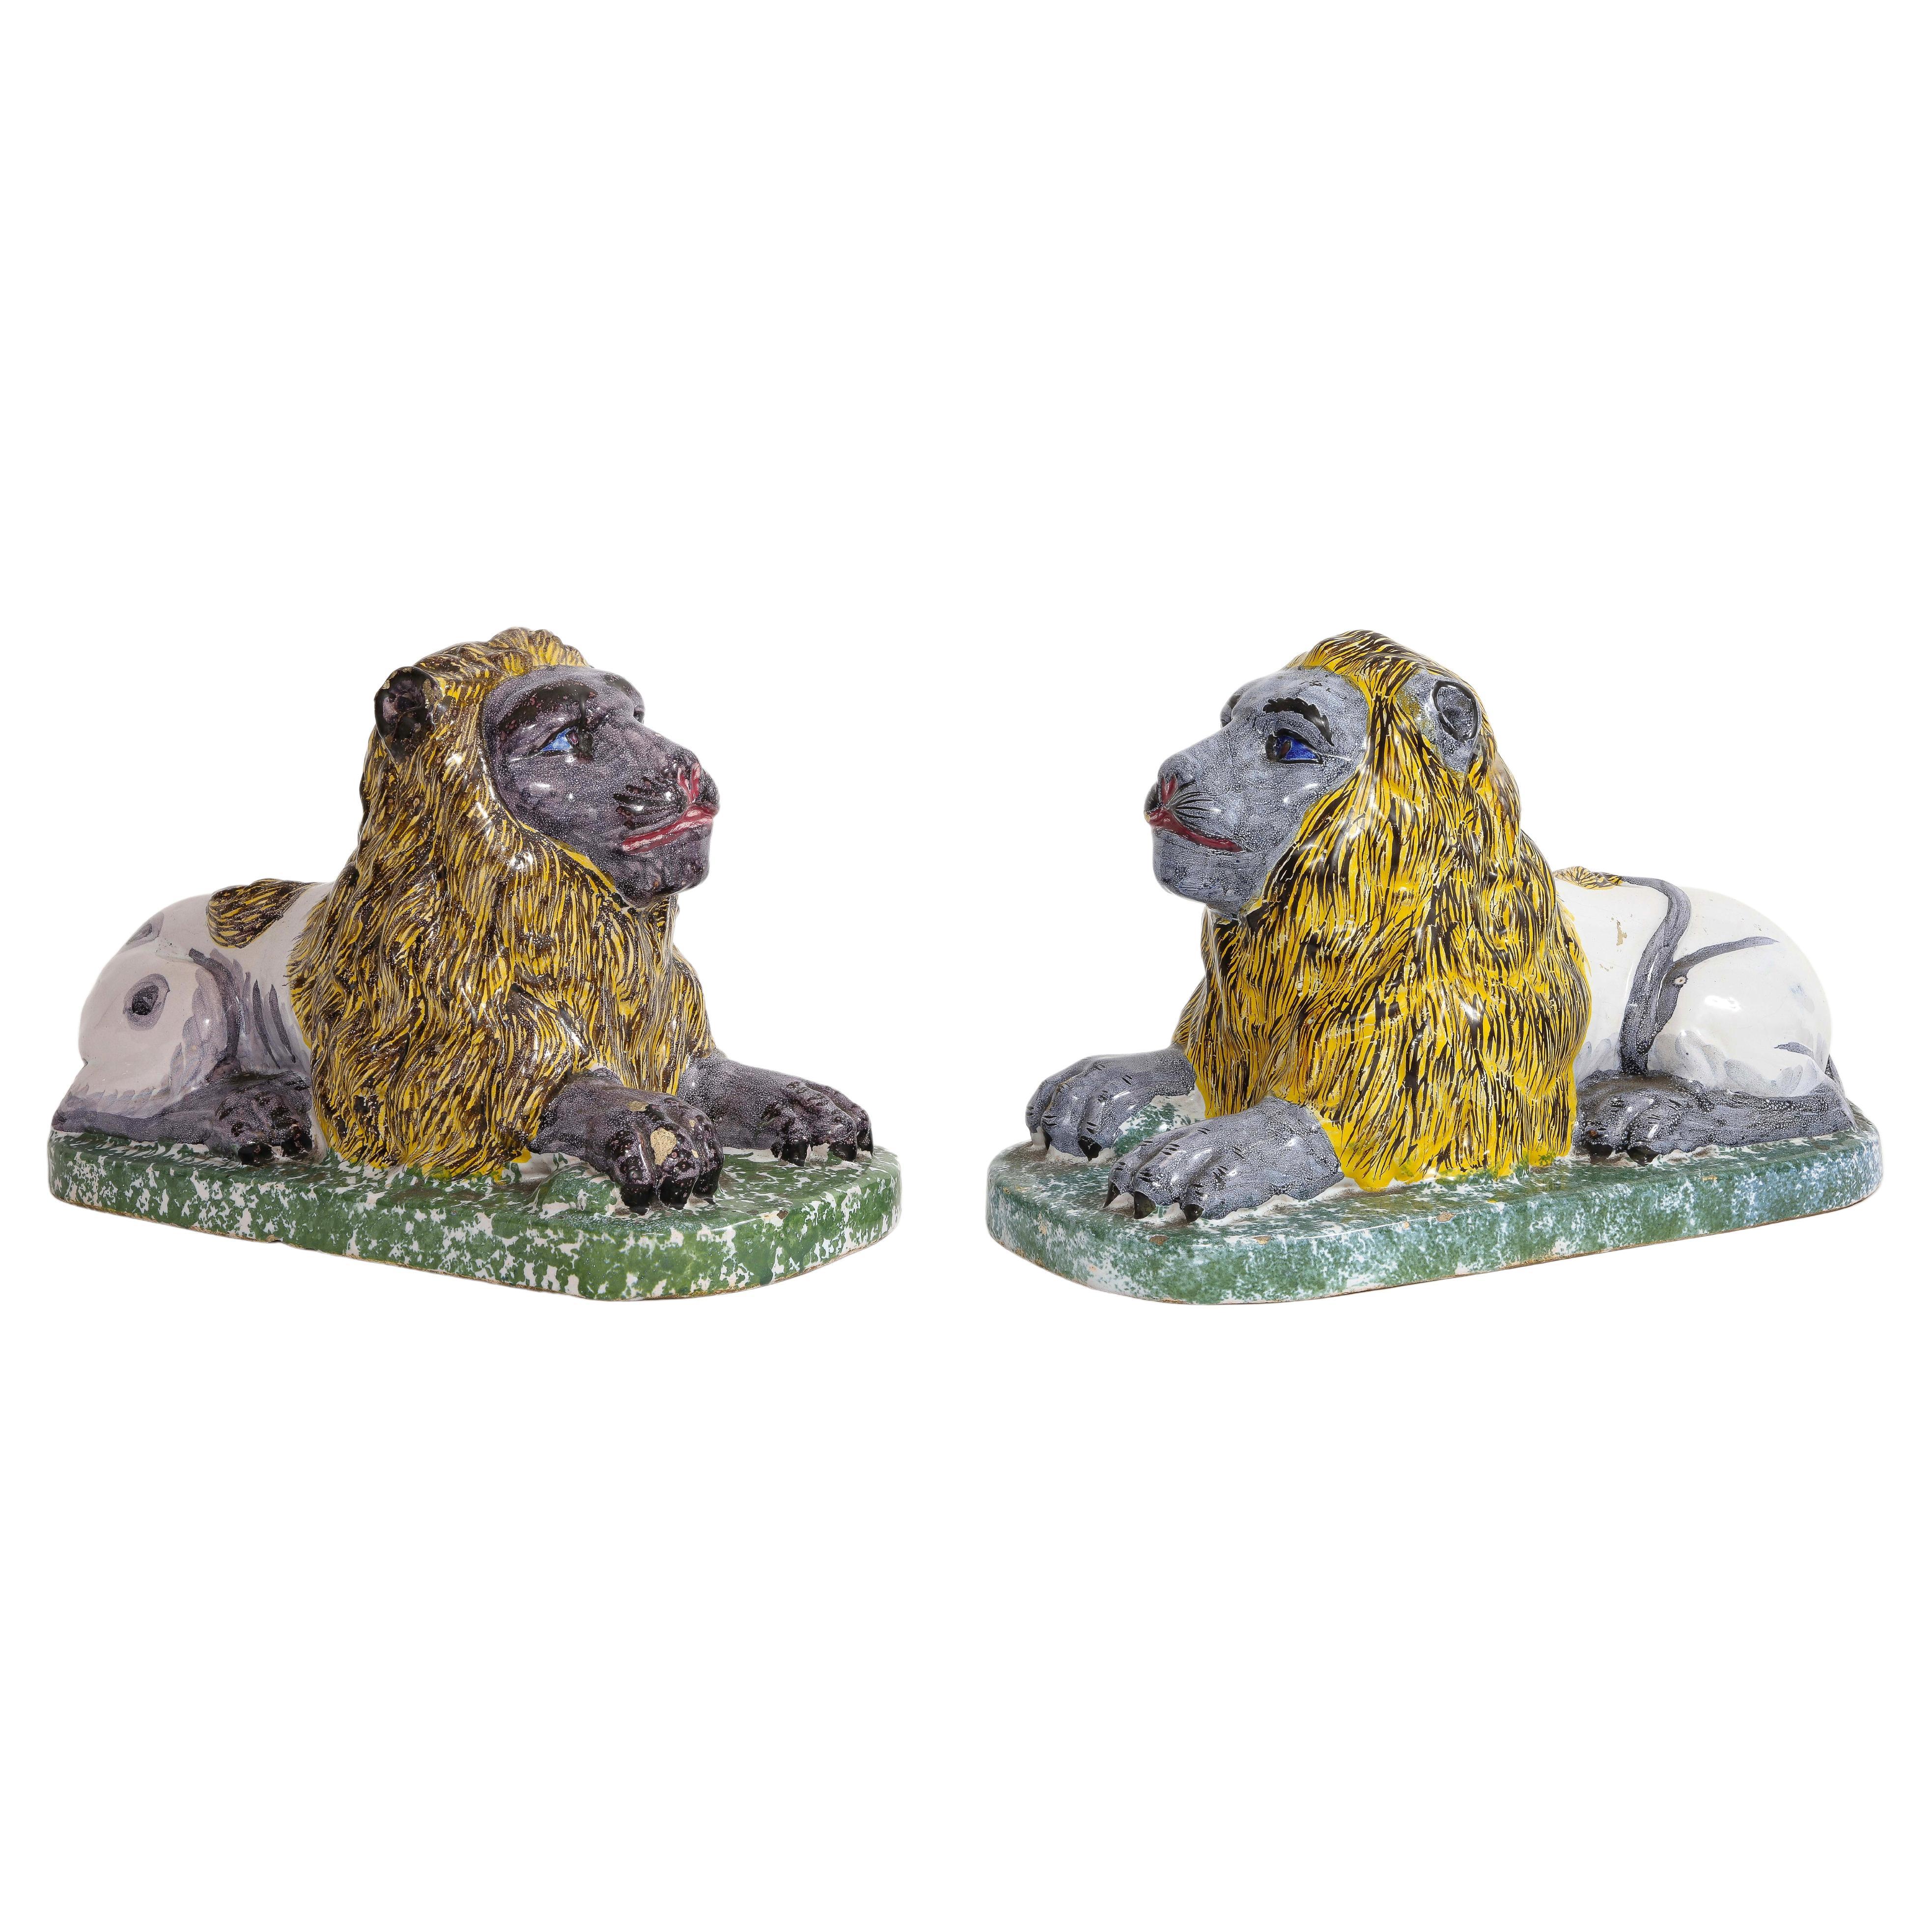 Pair of 19th Century French Majolica/Fiance Models of Lions Perched on Stands